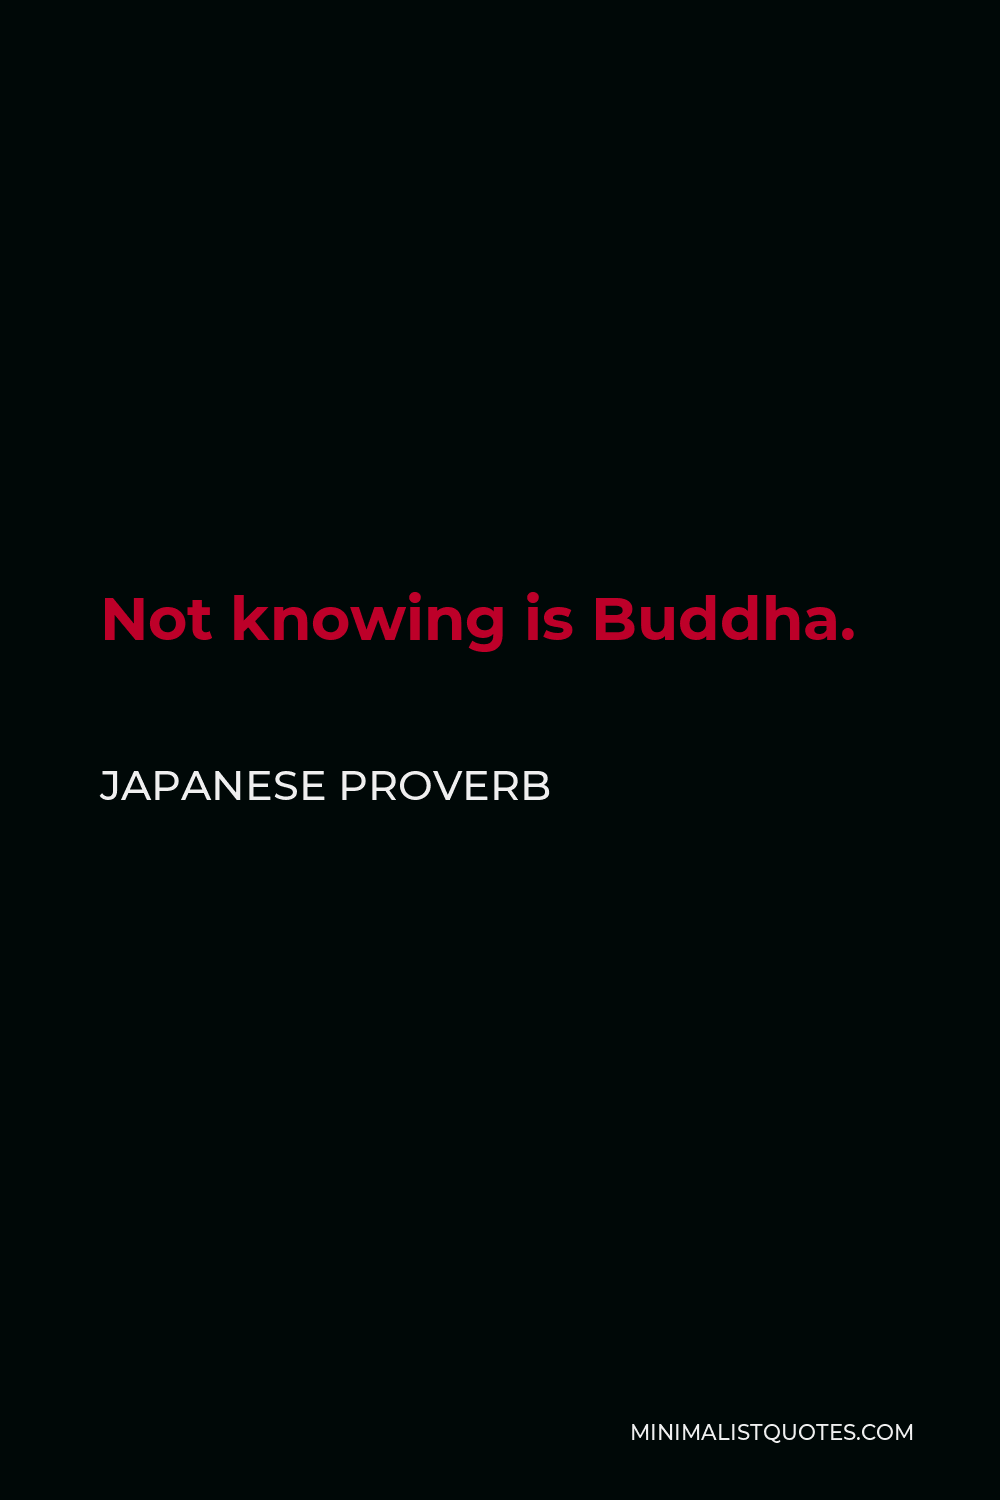 Japanese Proverb Quote - Not knowing is Buddha.